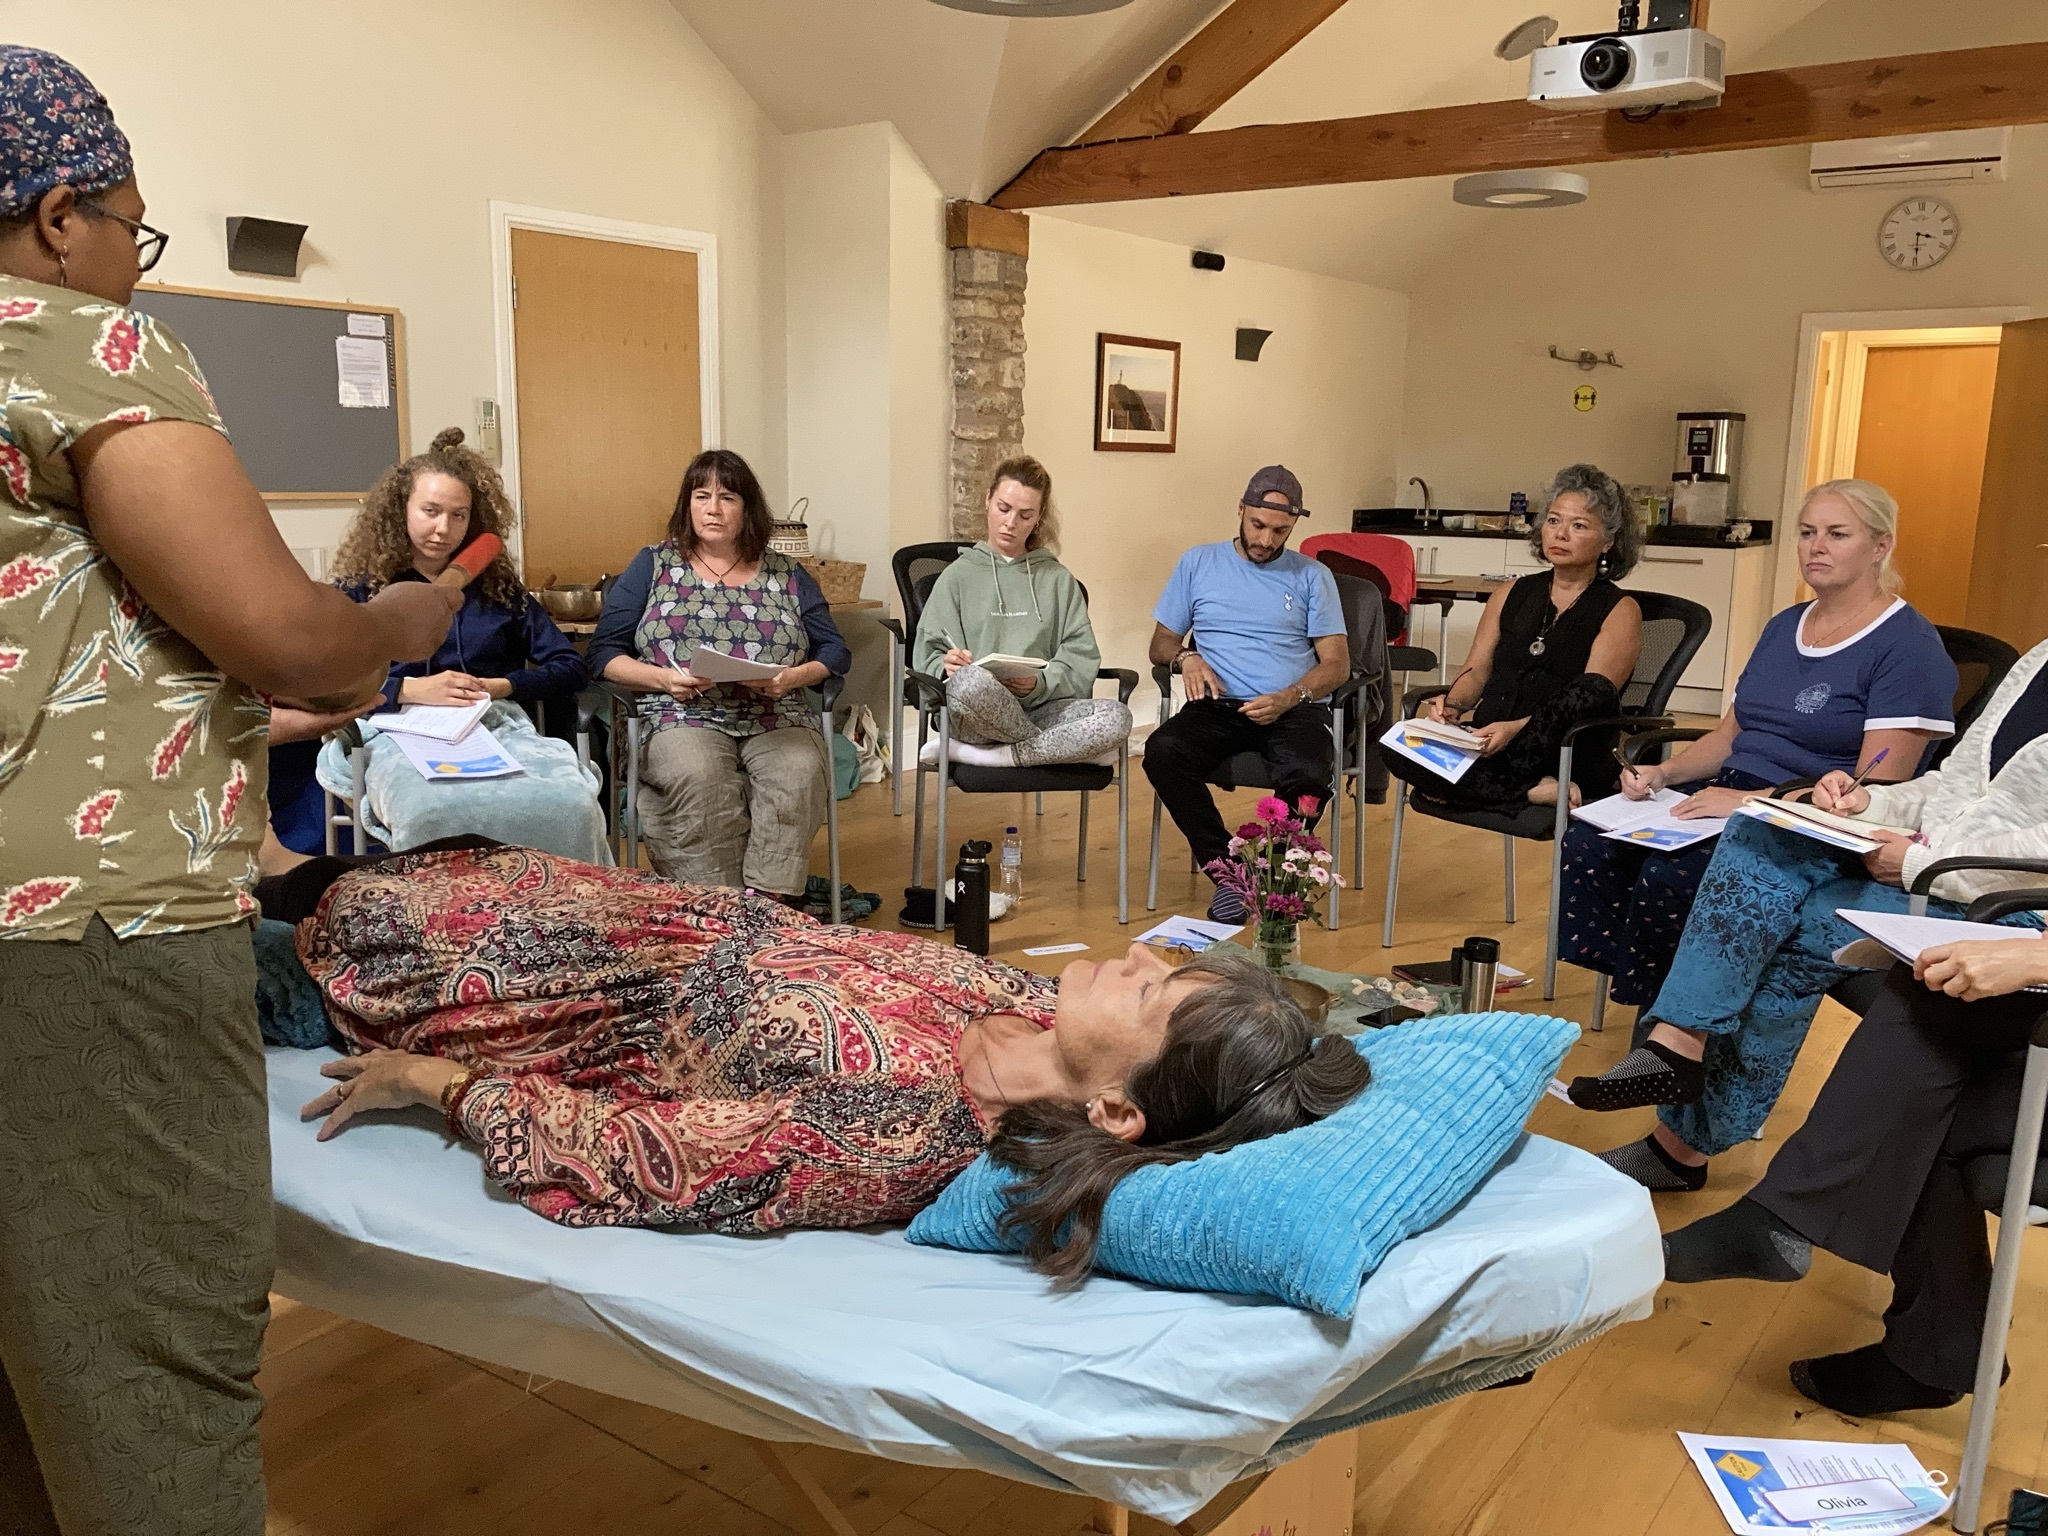 FROME, SOMERSET - Level 1 Foundations of Integral Sound Healing: 4 Day Immersion